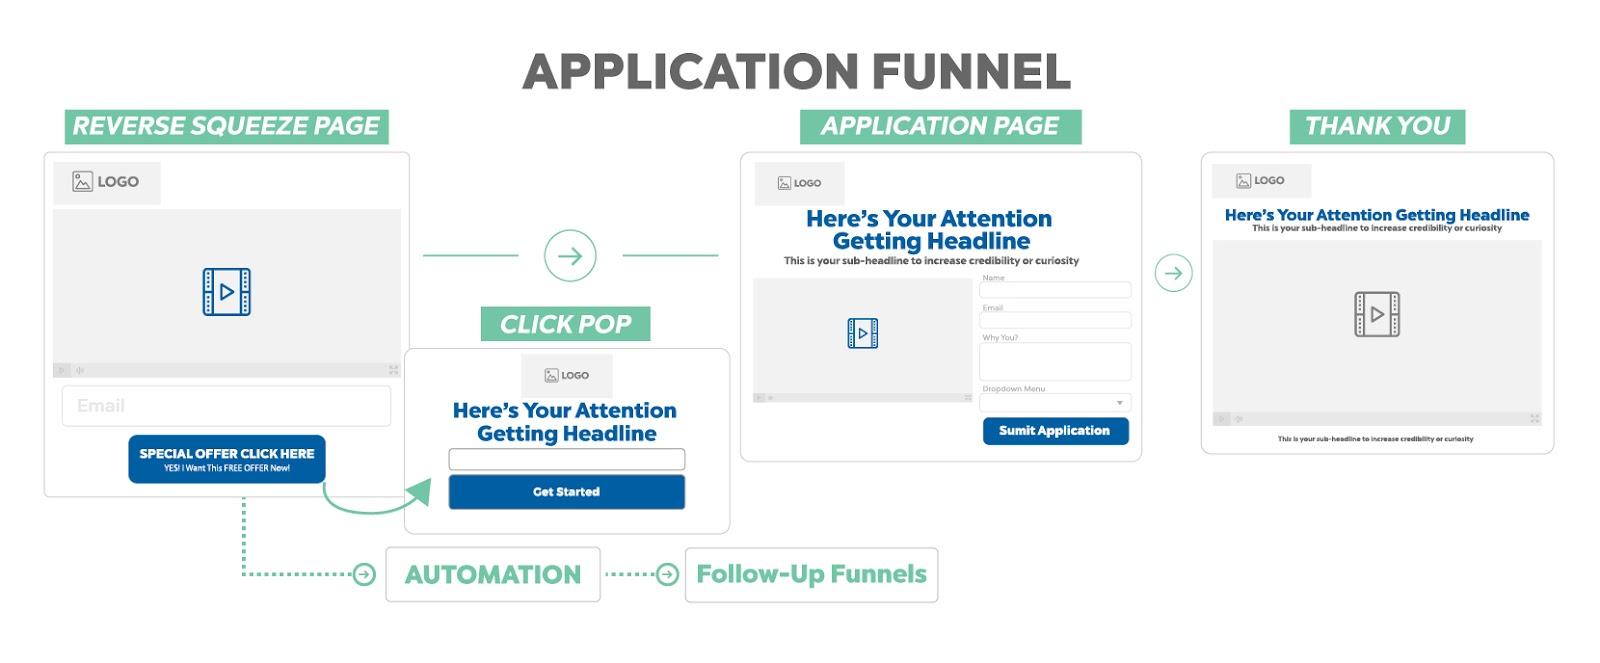 Sales Funnel Templates